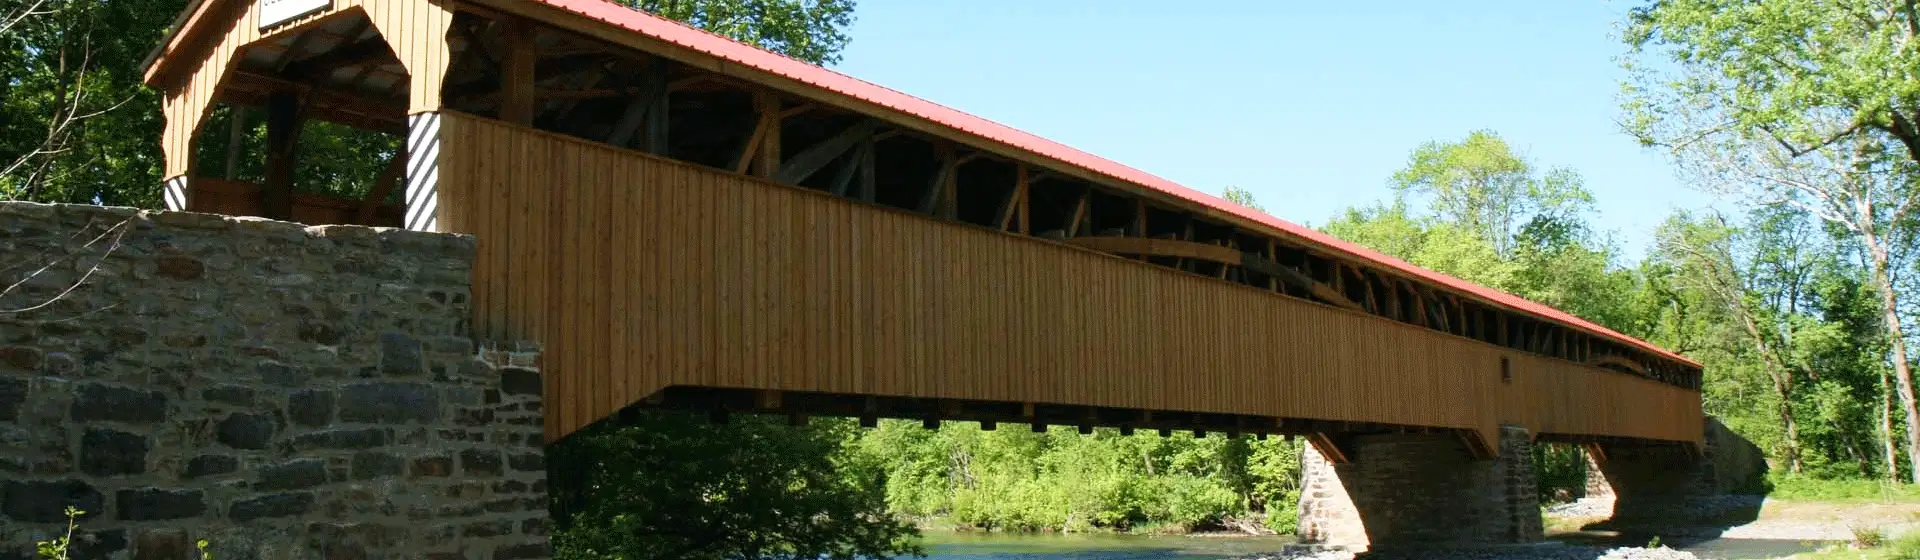 Buttonwood-Campground-Family-Camping-Central-Pennsylvania-Juniata-County-Covered-Bridges